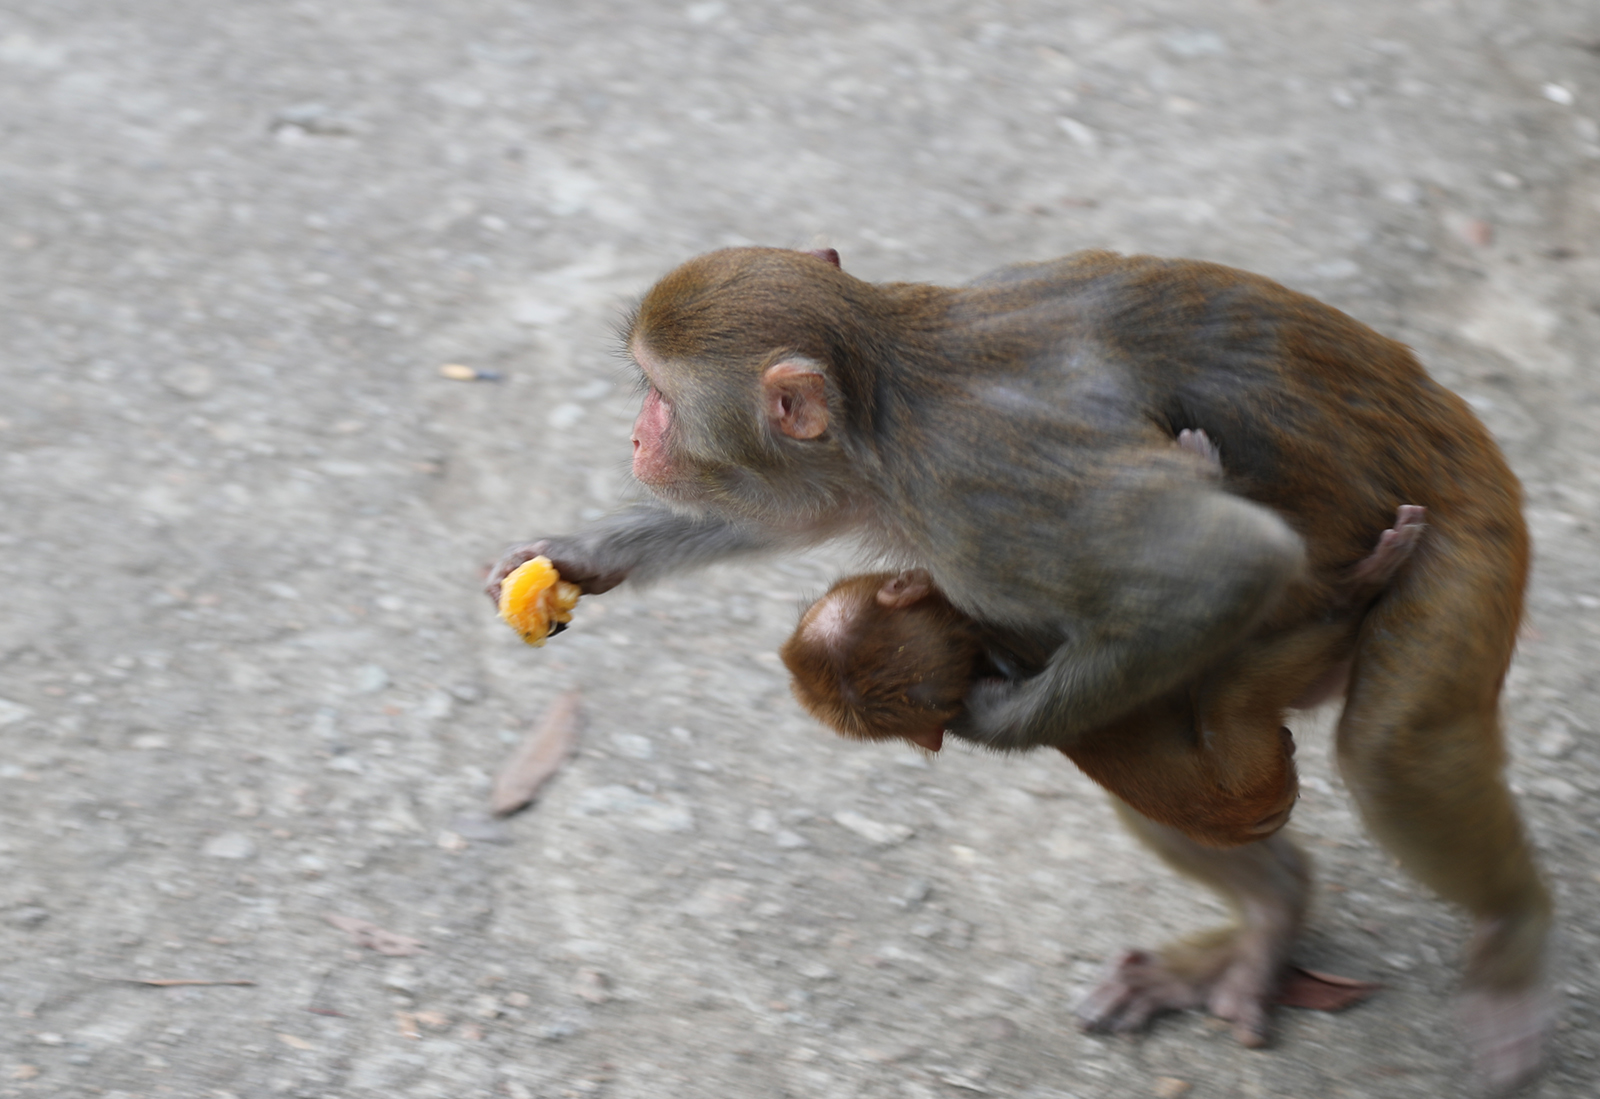 A macaque mother carrying her child runs at the Nanwan Monkey Island nature reserve in Lingshui, Hainan Province. /CGTN